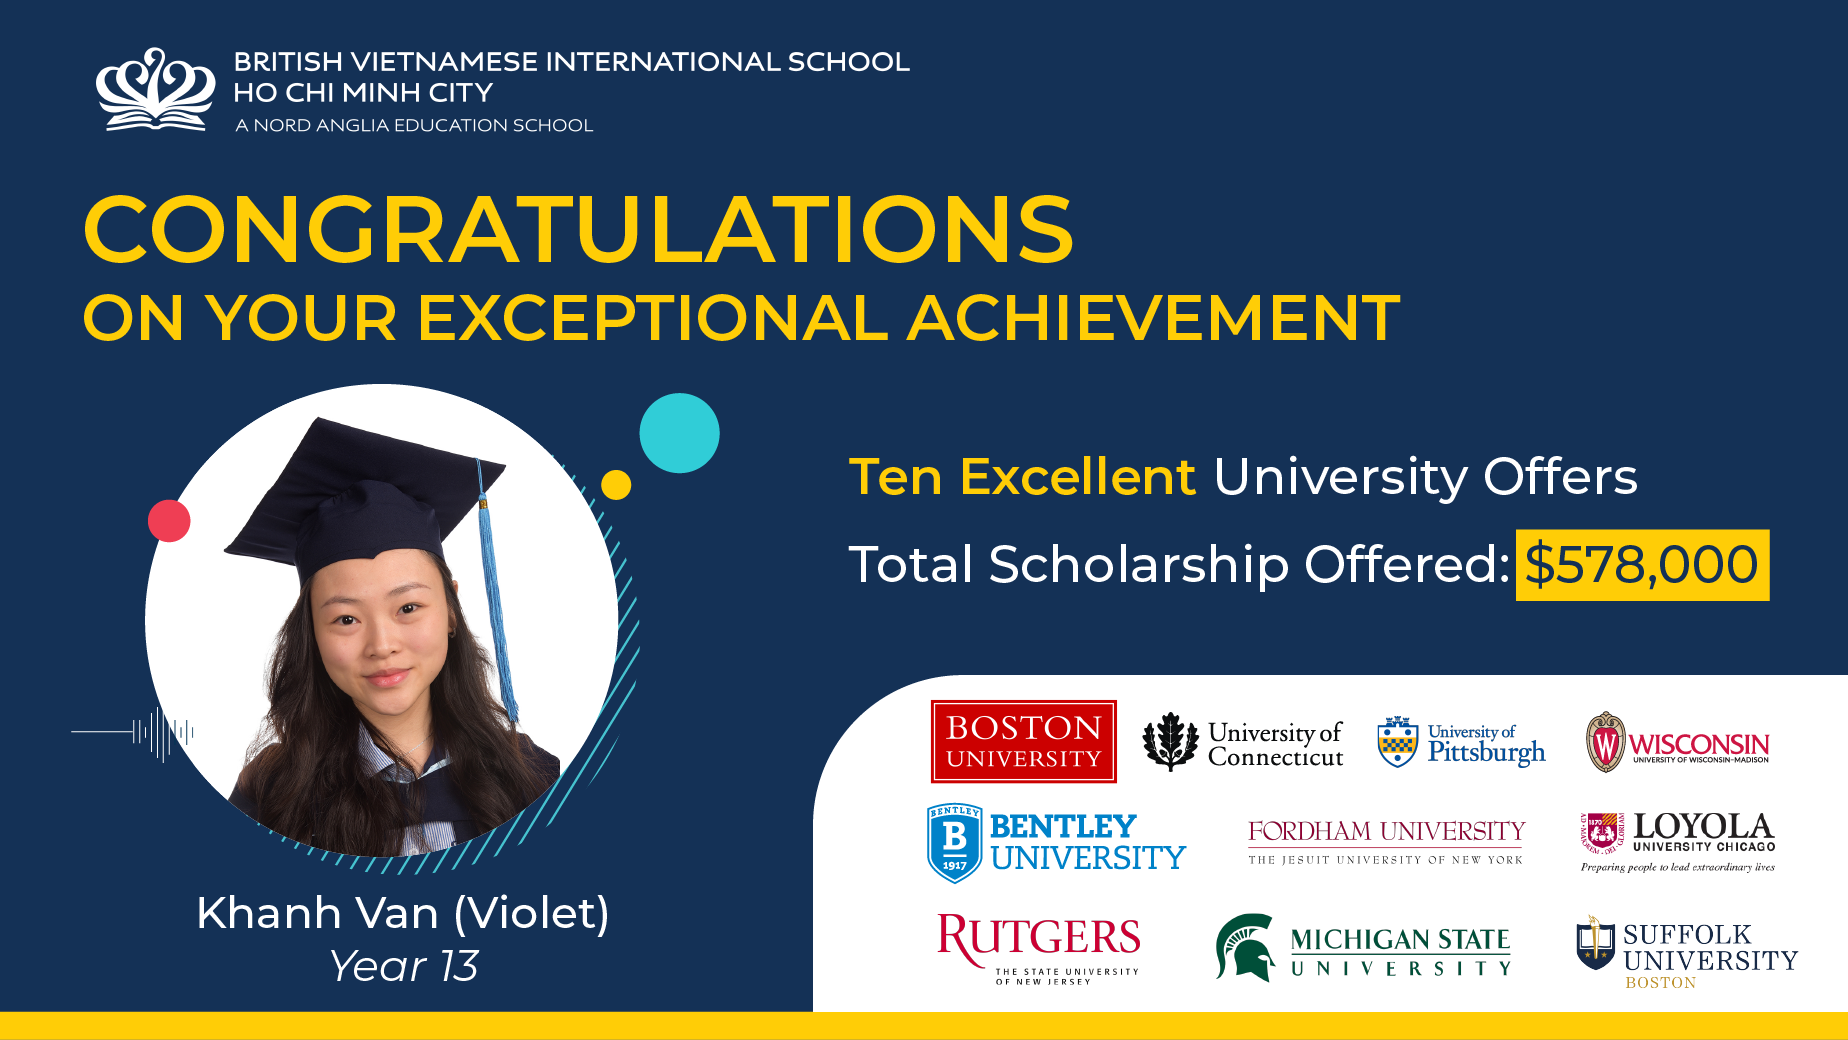 Khanh Van (Violet), a Year 13 student who successfully conquered 10 US universities with a total scholarship value of over 14.5 billion VND - Khanh Van Violet Year 13 conquered 10 US universities total scholarship 14 5 billion VND